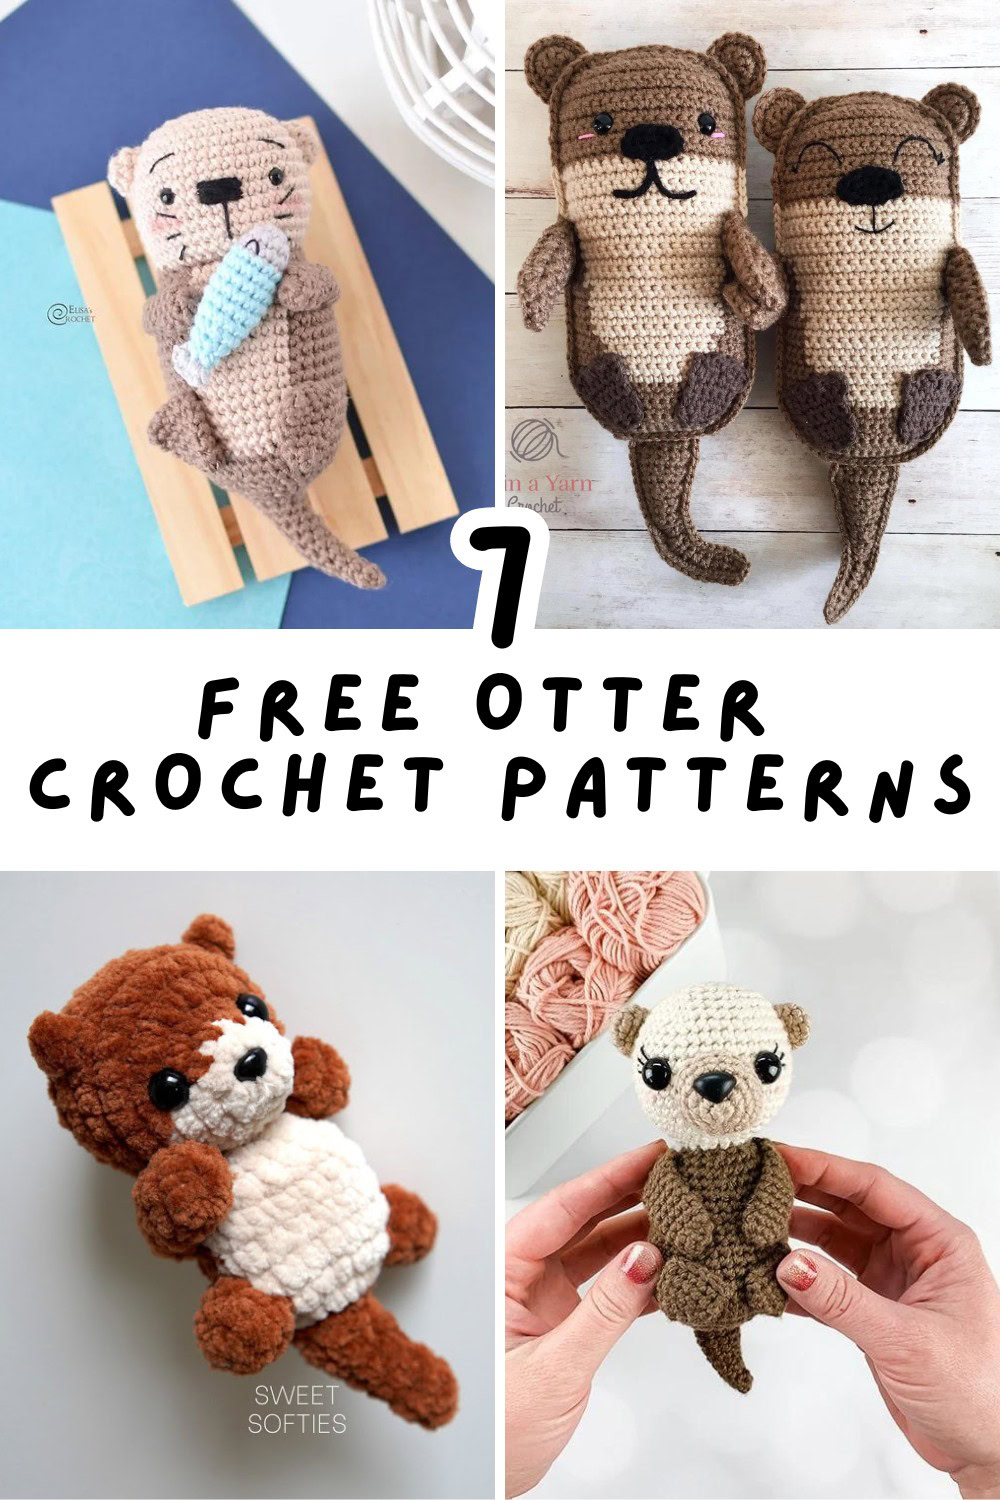 Bring some whimsy into your life with these cute otter crochet toys! These amigurumi patterns are perfect for making delightful stuffies that will charm kids and adults alike. Get your crochet hooks ready for some fun! 🌟🦦 #CrochetToys #Stuffies